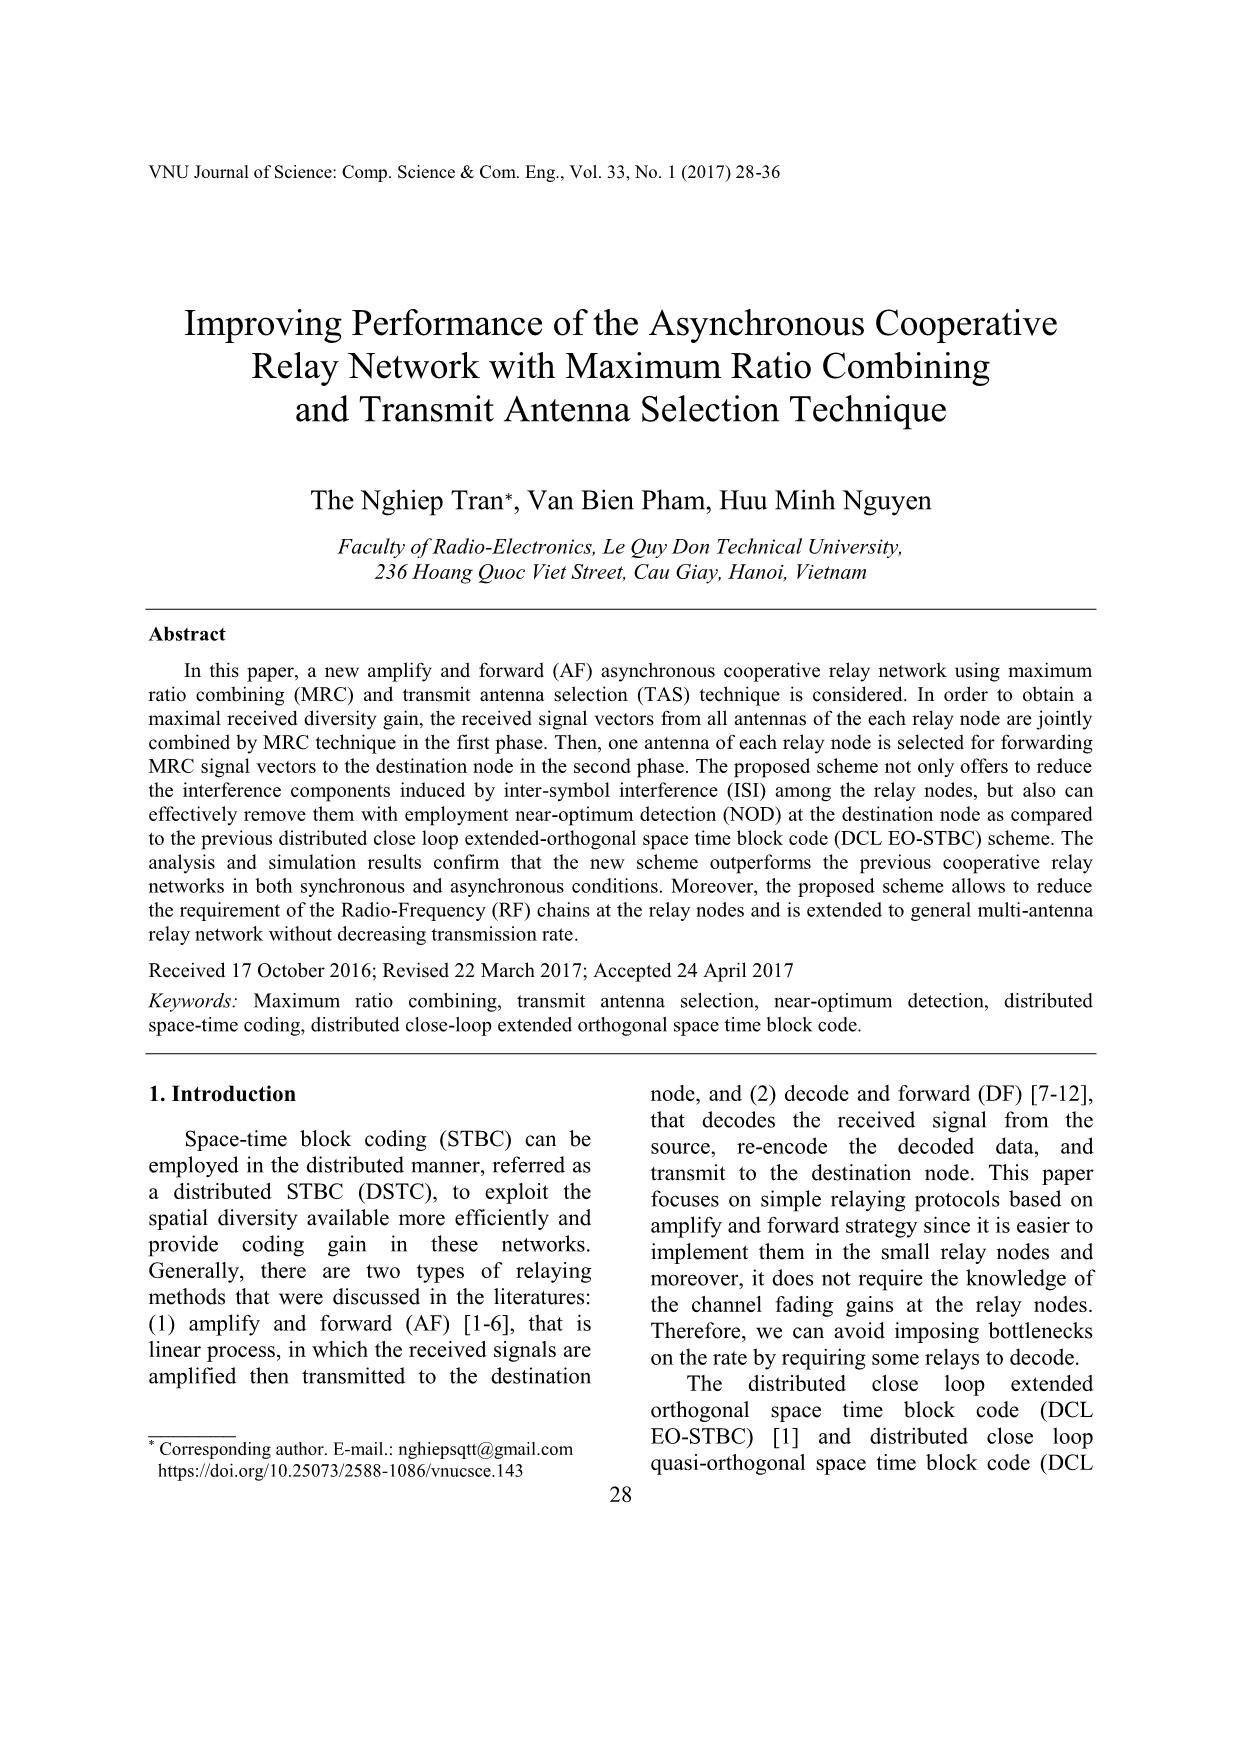 Improving performance of the asynchronous cooperative relay network with maximum ratio combining and transmit antenna selection technique trang 1